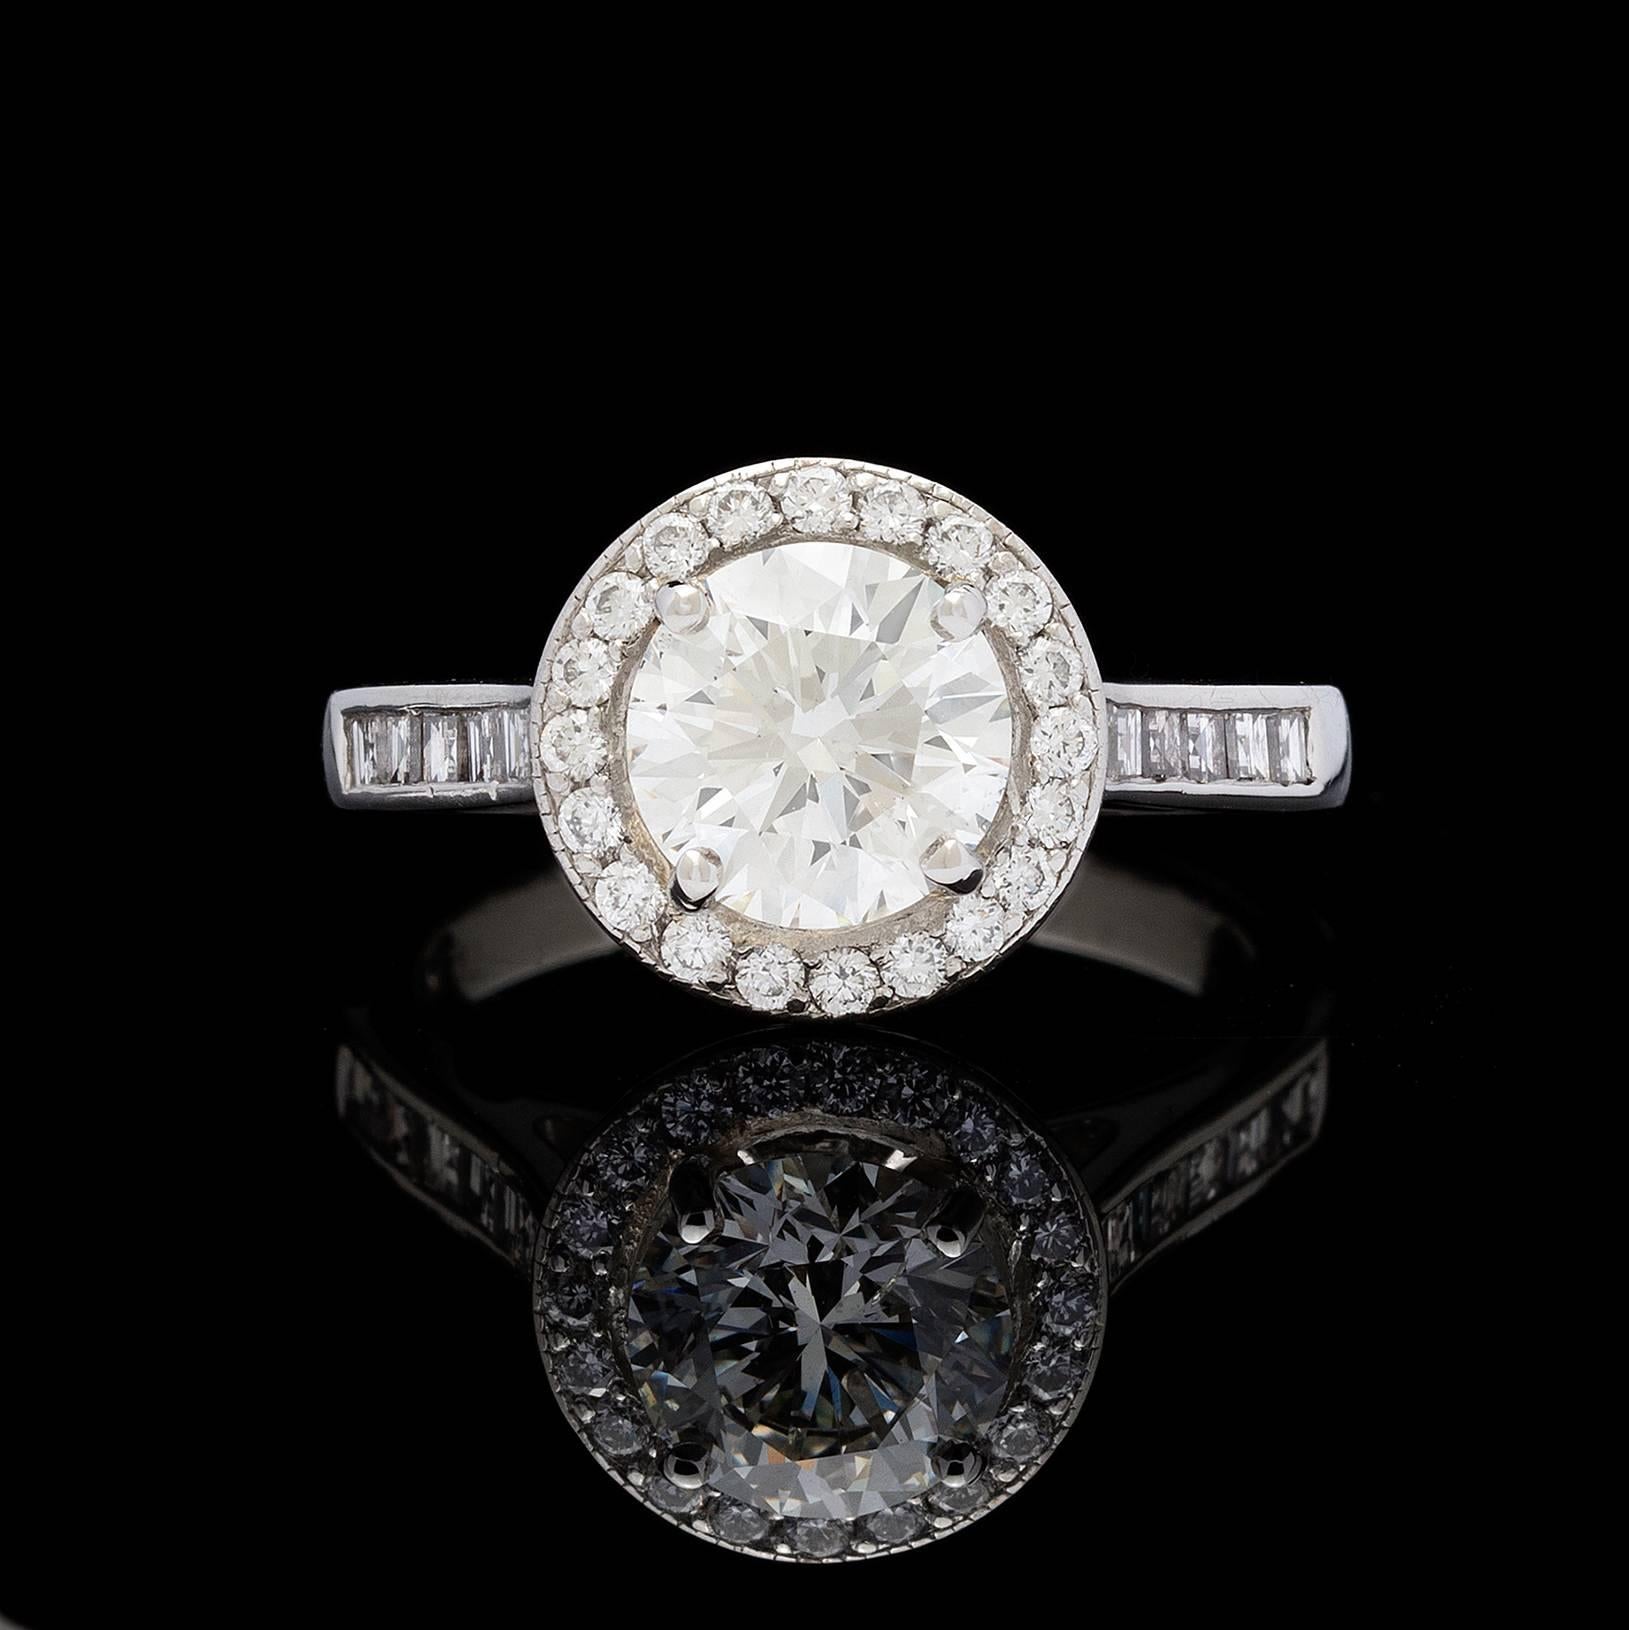 Platinum estate ring featuring a GIA graded 1.57 carat round brilliant cut H/SI1 diamond in a halo of round full cut diamonds.  The band is channel set with baguette cut diamonds making for a nice contrast.  The side diamonds total approximately